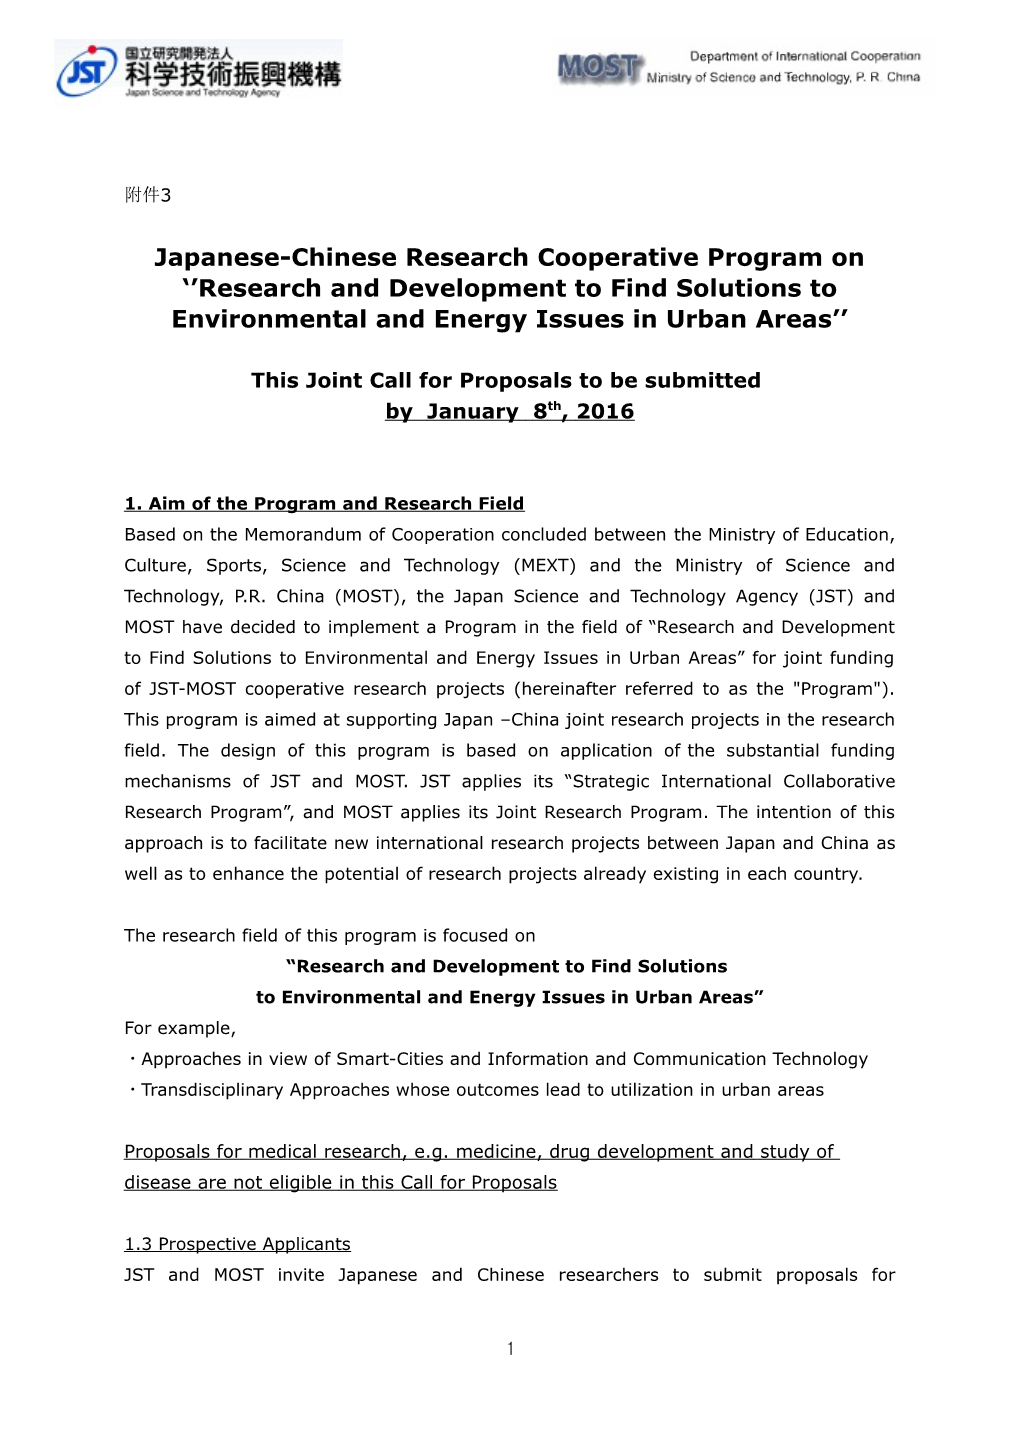 Japanese-Chinese Research Cooperative Program On